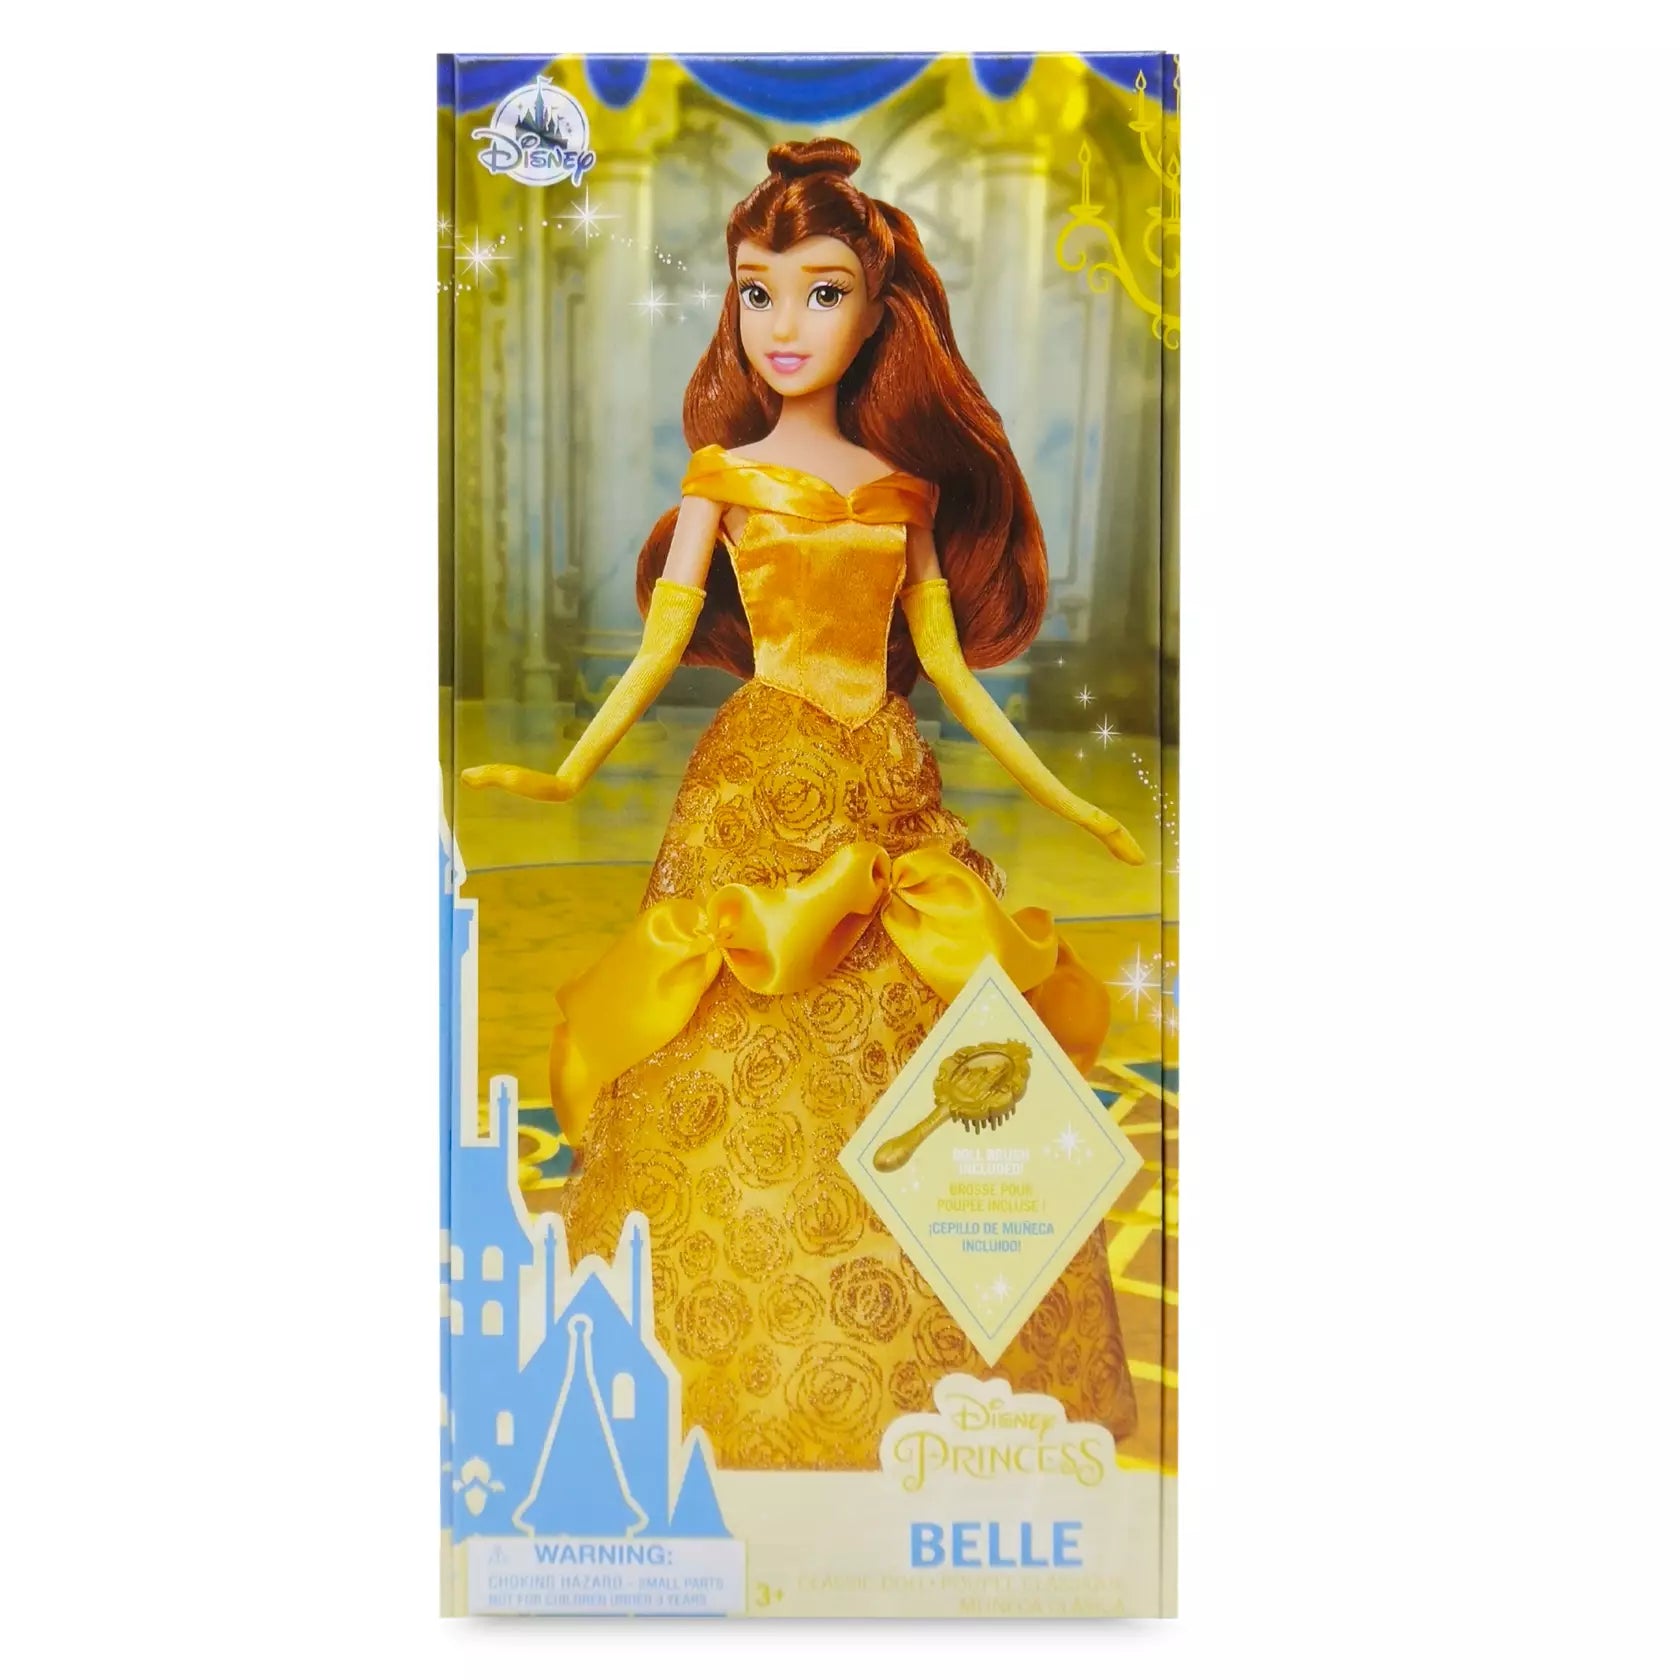 Disney Belle Classic Doll – Beauty and the Beast - BumbleToys - 5-7 Years, Belle, Disney Princess, Fashion Dolls & Accessories, Girls, Pre-Order